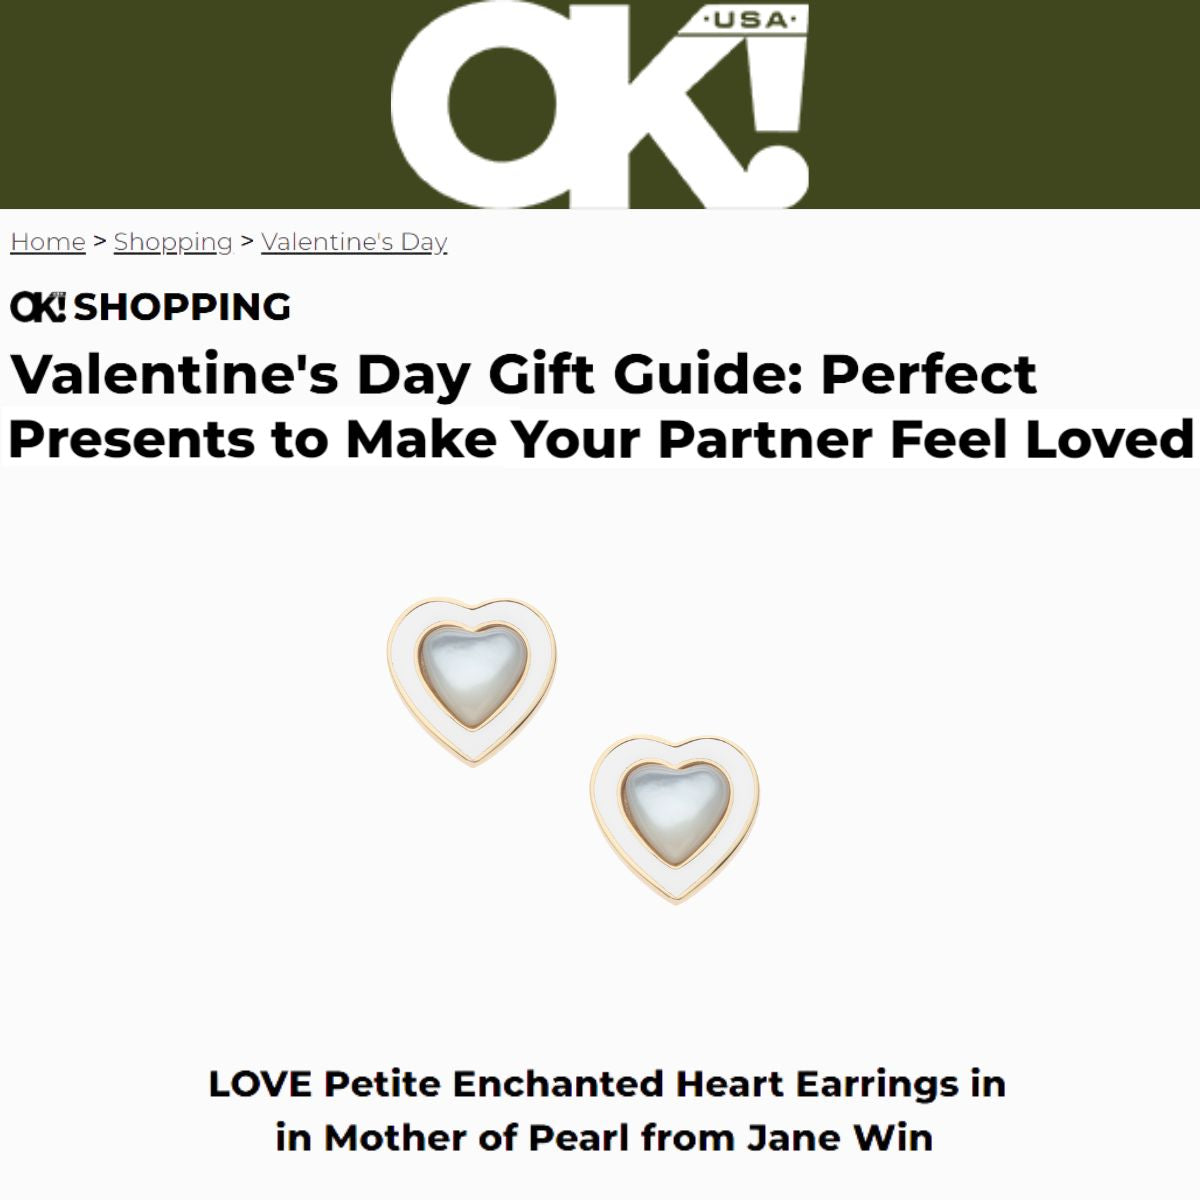 Press Highlight: OK Magazine's "Valentines Day Gift Guide: Perfect Presents To Make Your Partner Feel Loved"